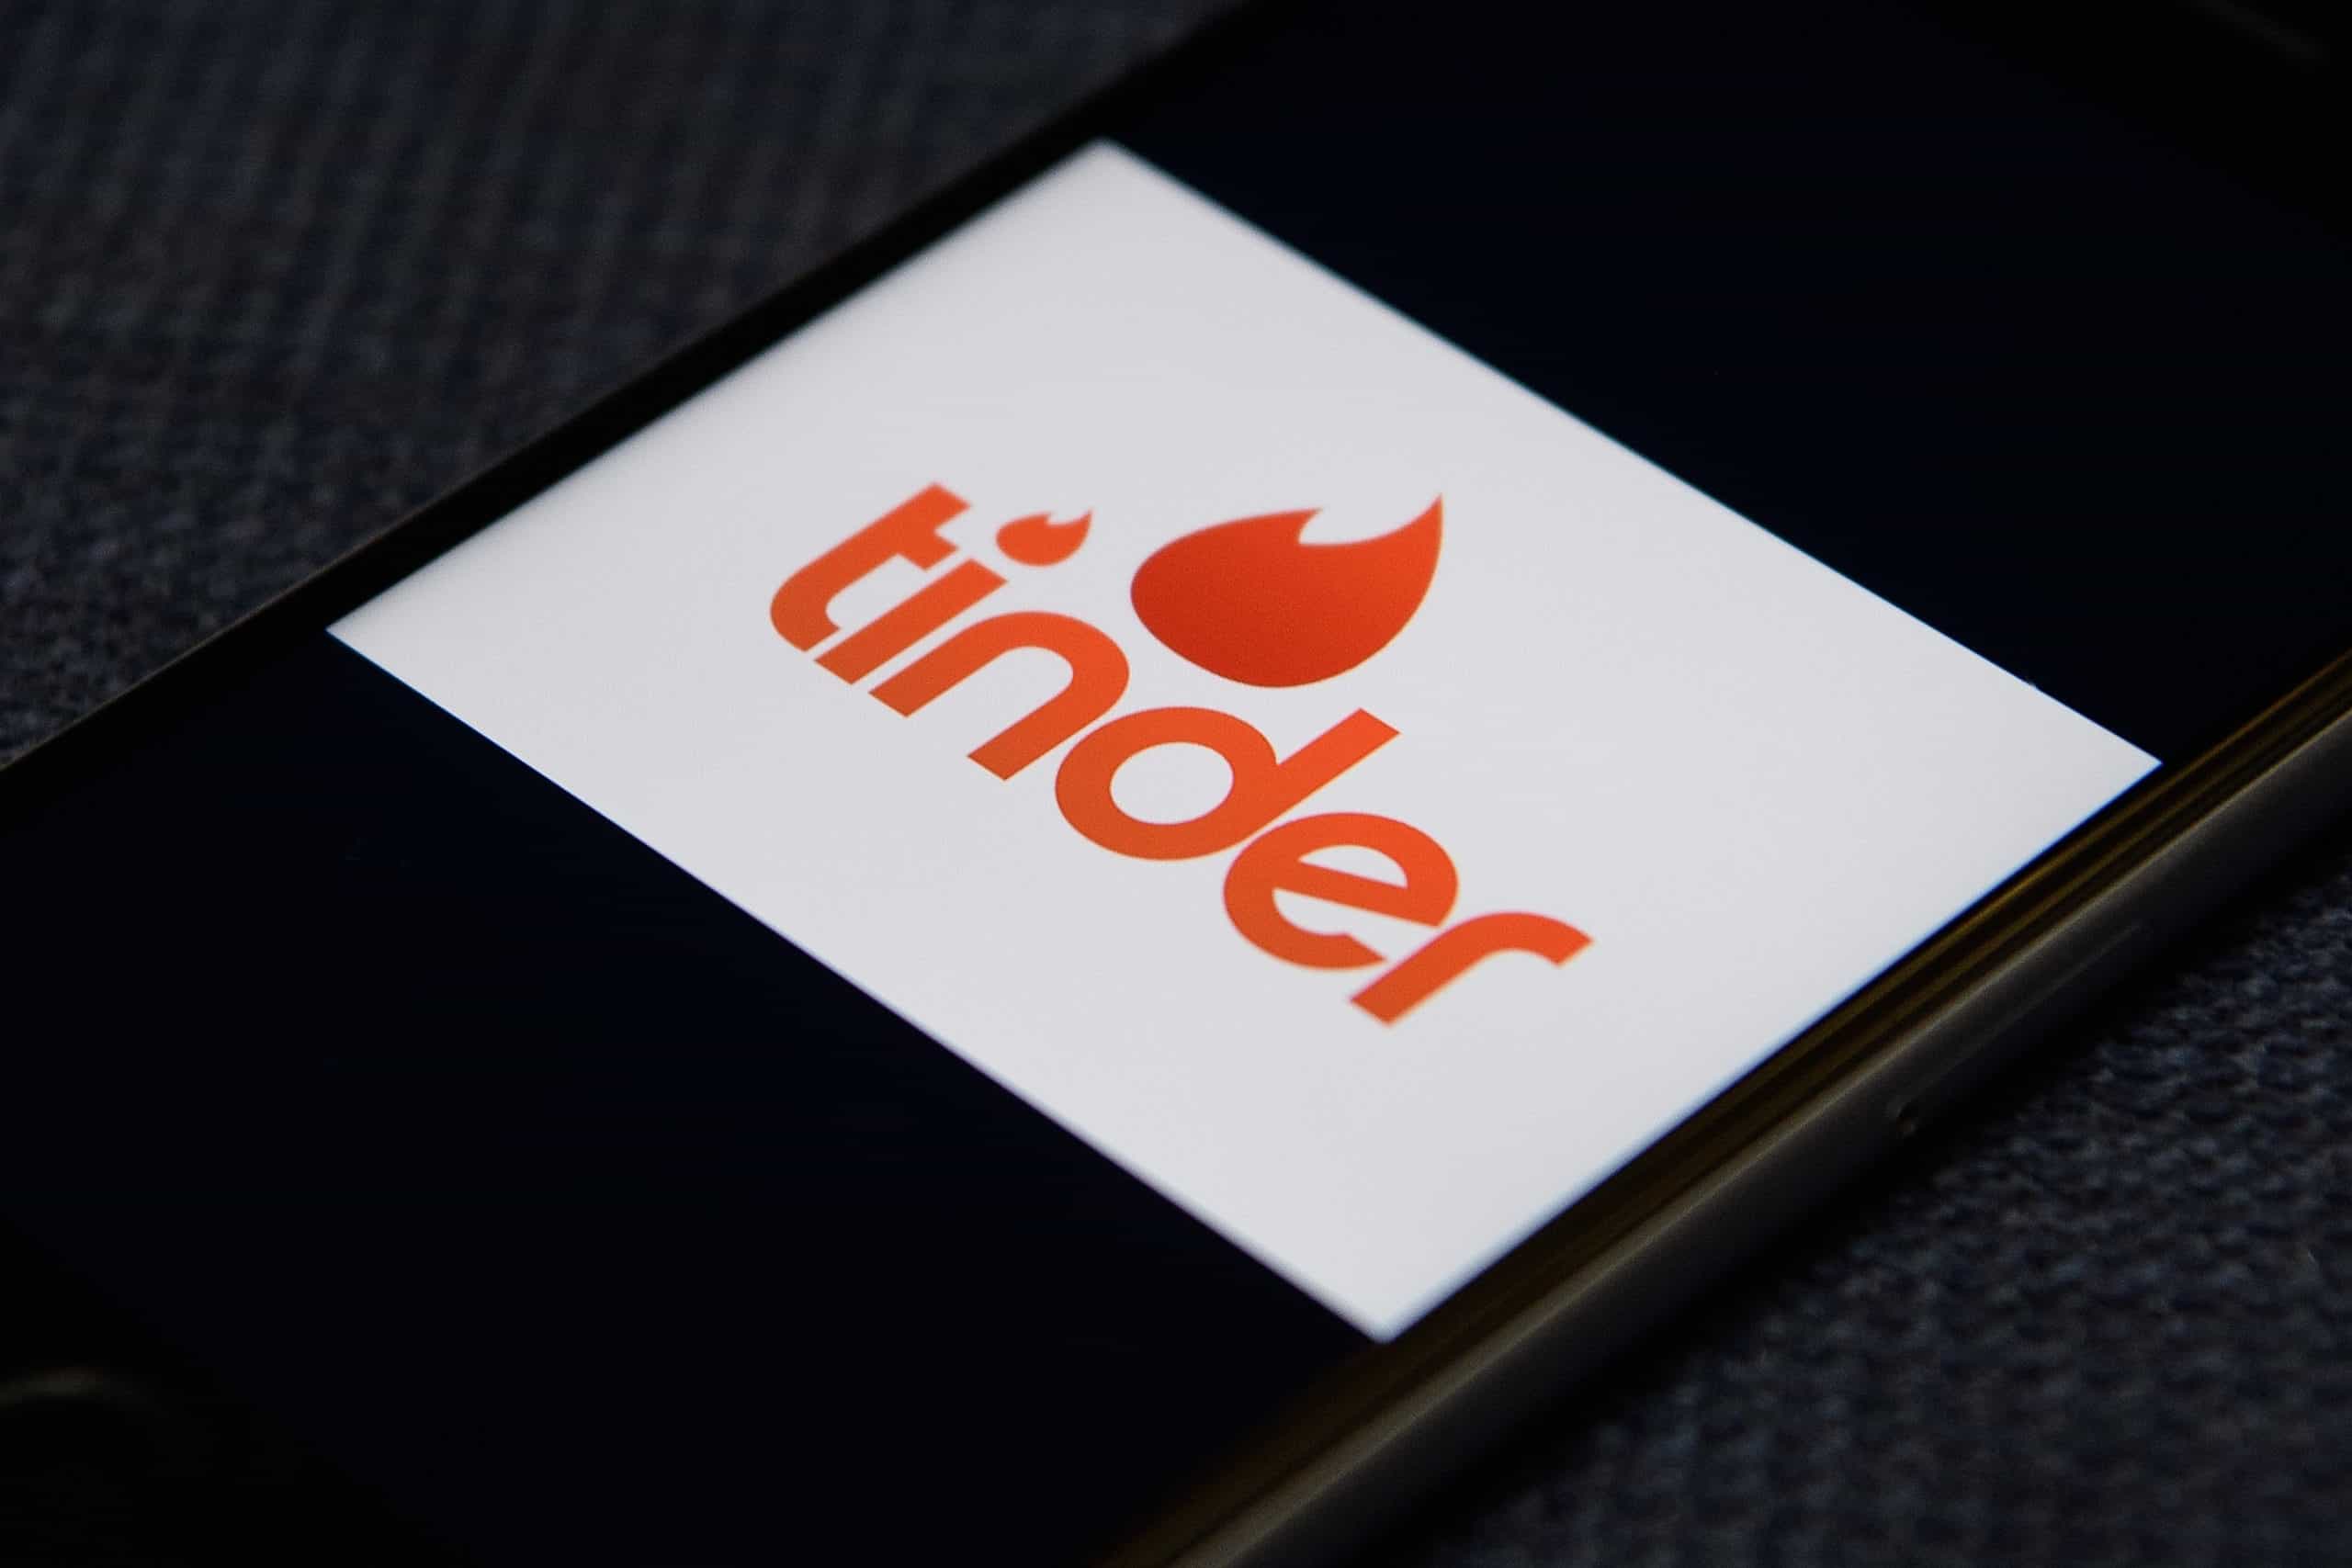 Tinder Users Will Reportedly Soon Be Able To Run Background Checks On Potential Dates—Includes Arrest Record, Restraining Orders, History Of Violence & More